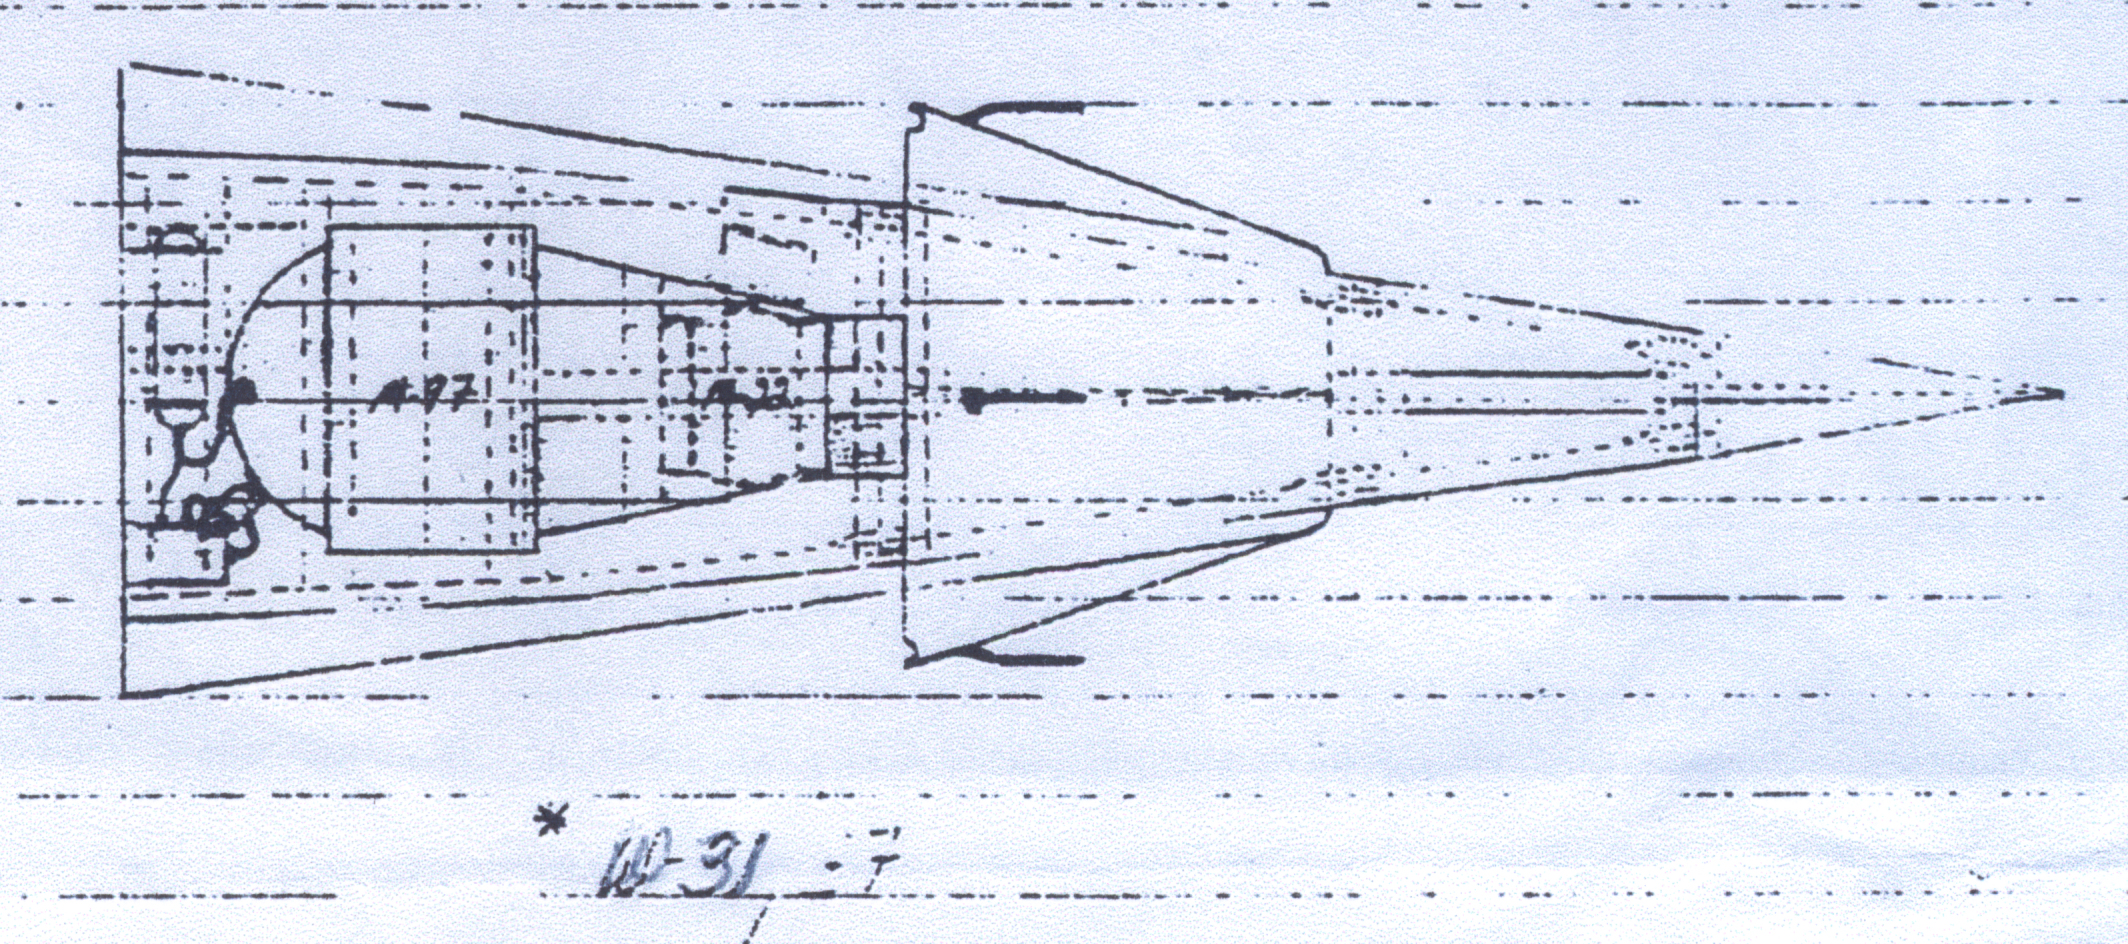 schematic of forward section of Nike Hercules showing warhead placement